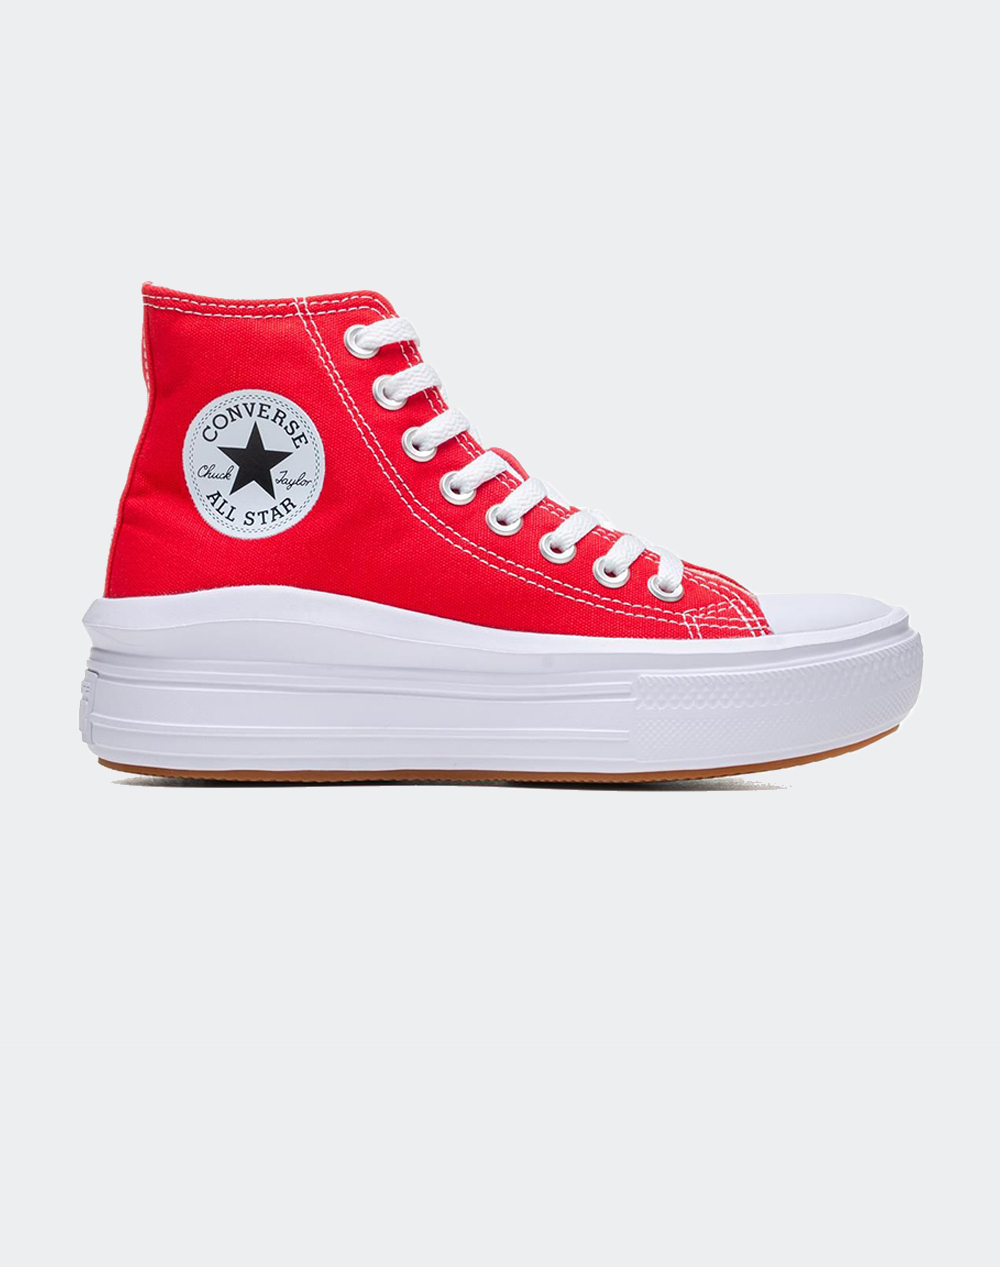 CONVERSE CHUCK TAYLOR ALL STAR MOVE A09073C-600 Red